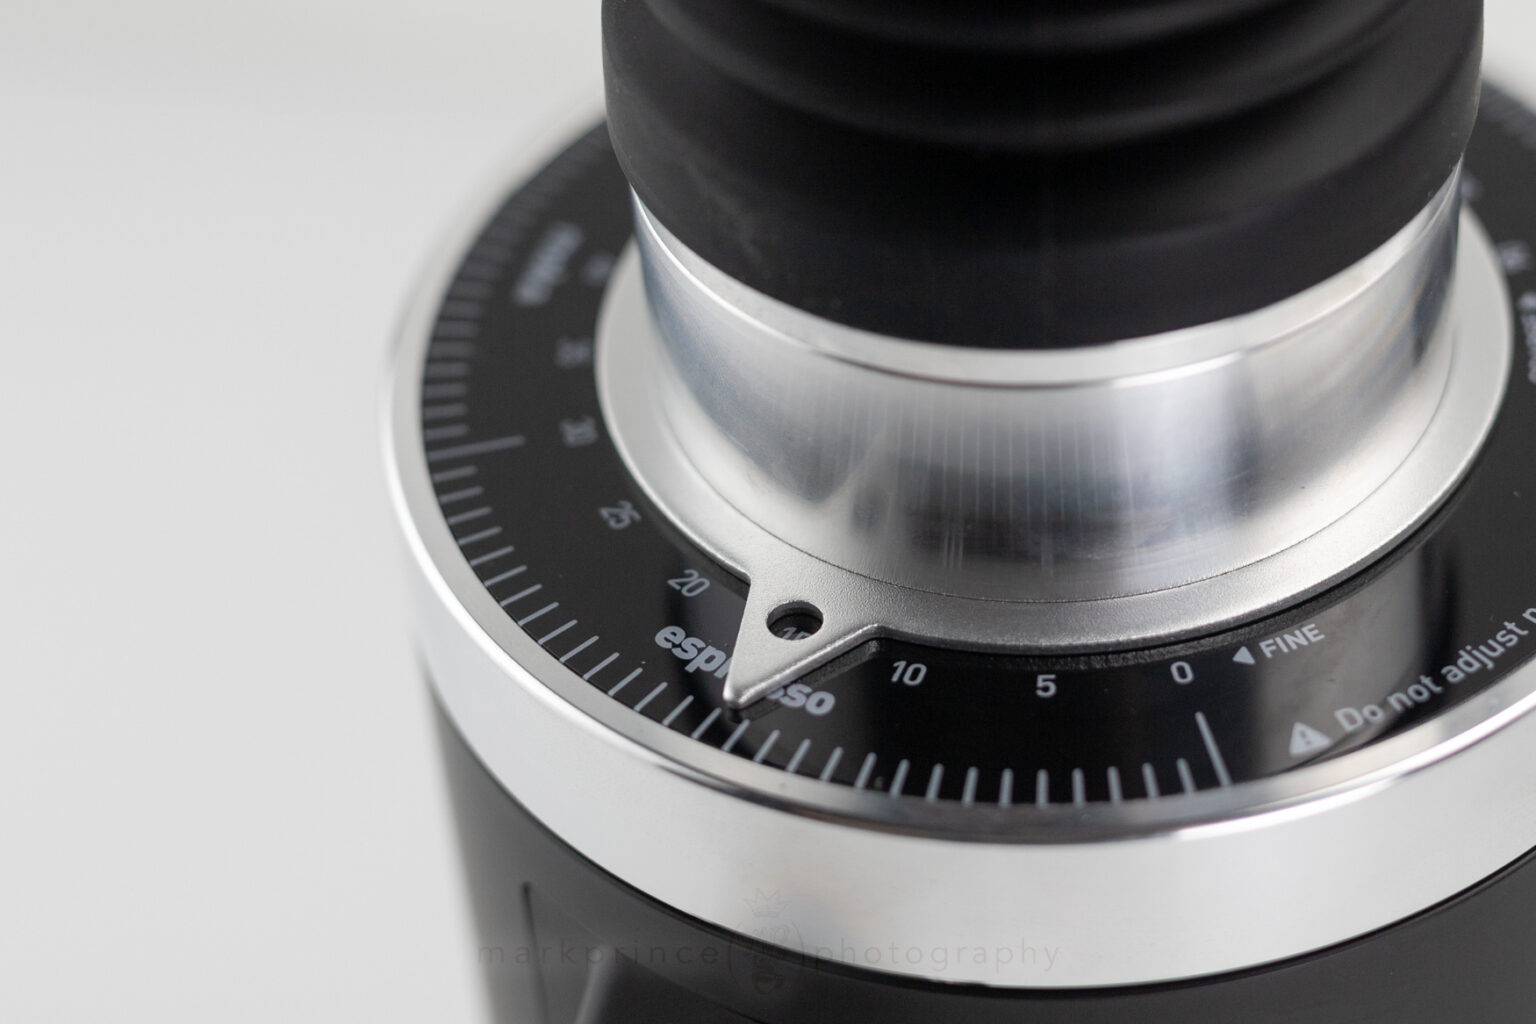 The low profile grind setting indicator dial can be adjusted to the grinder's real zero point.